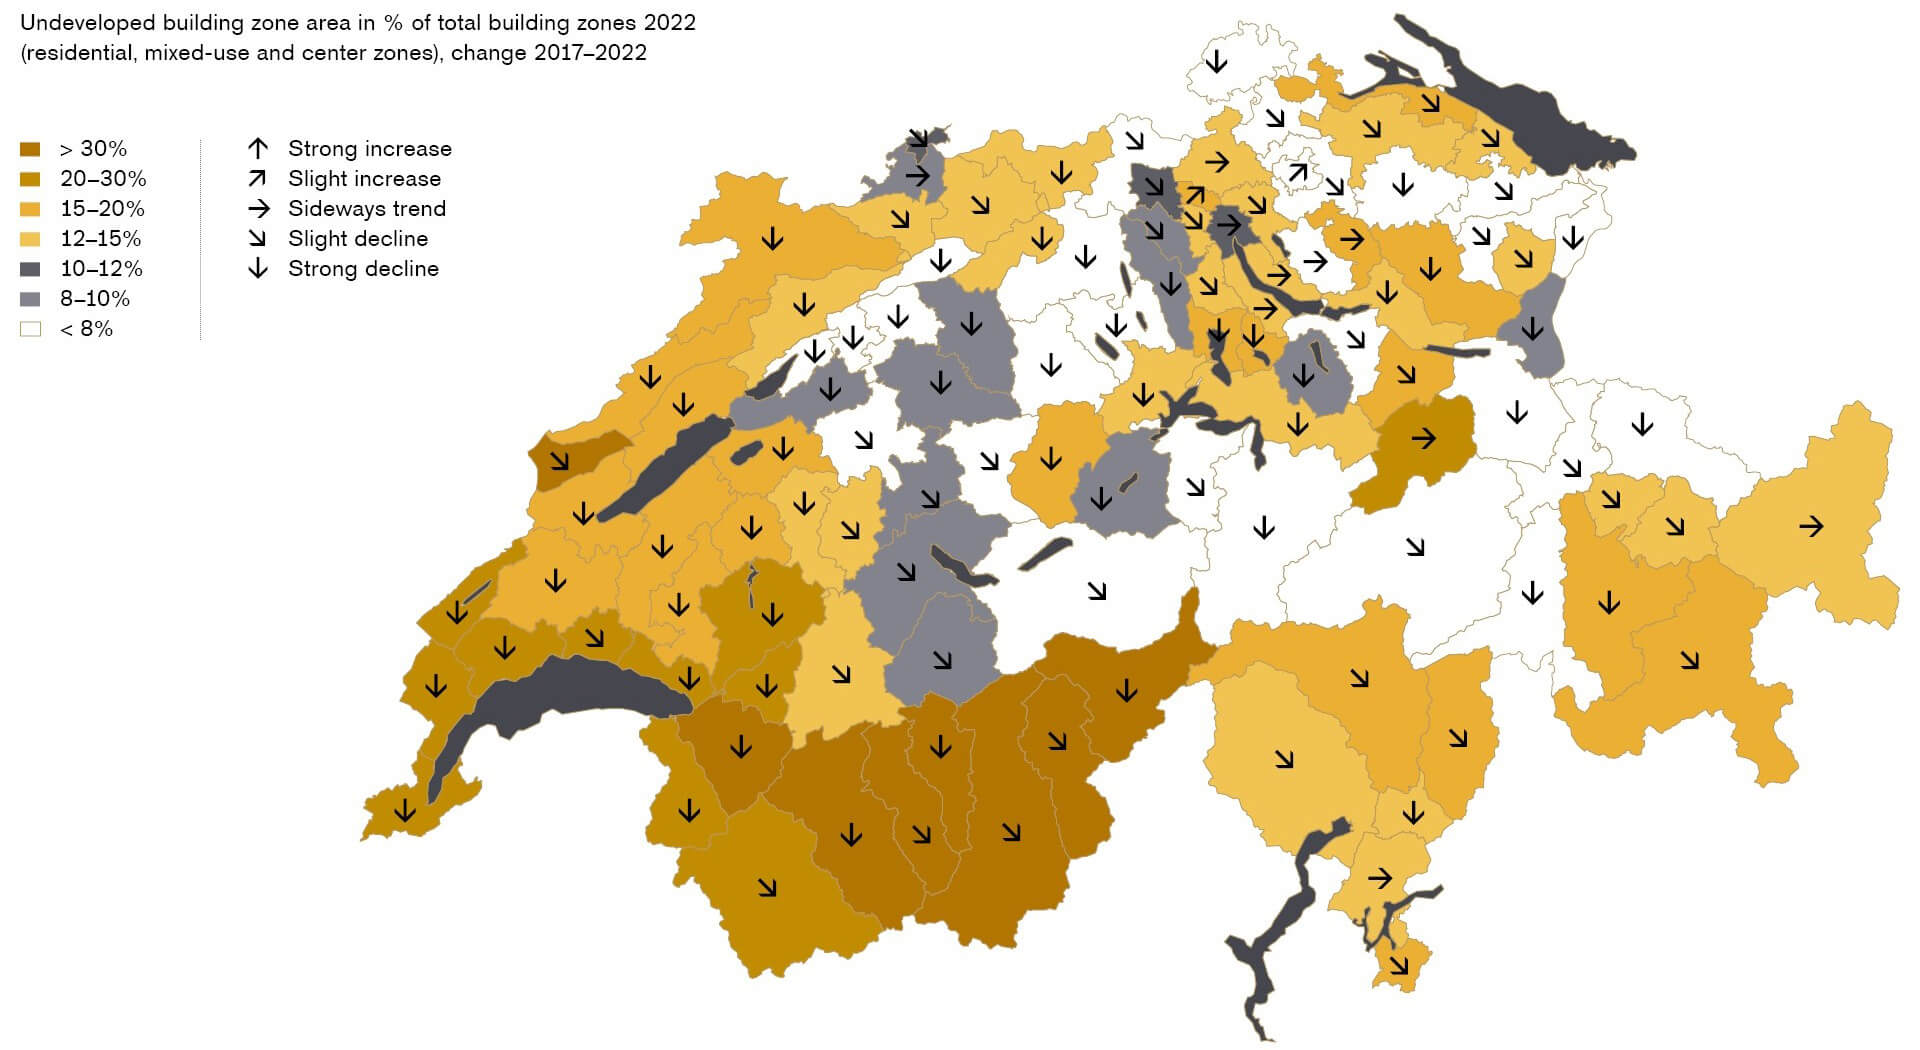 Map showing trend in undeveloped building zone area as a percentage of total building zones in Switzerland.